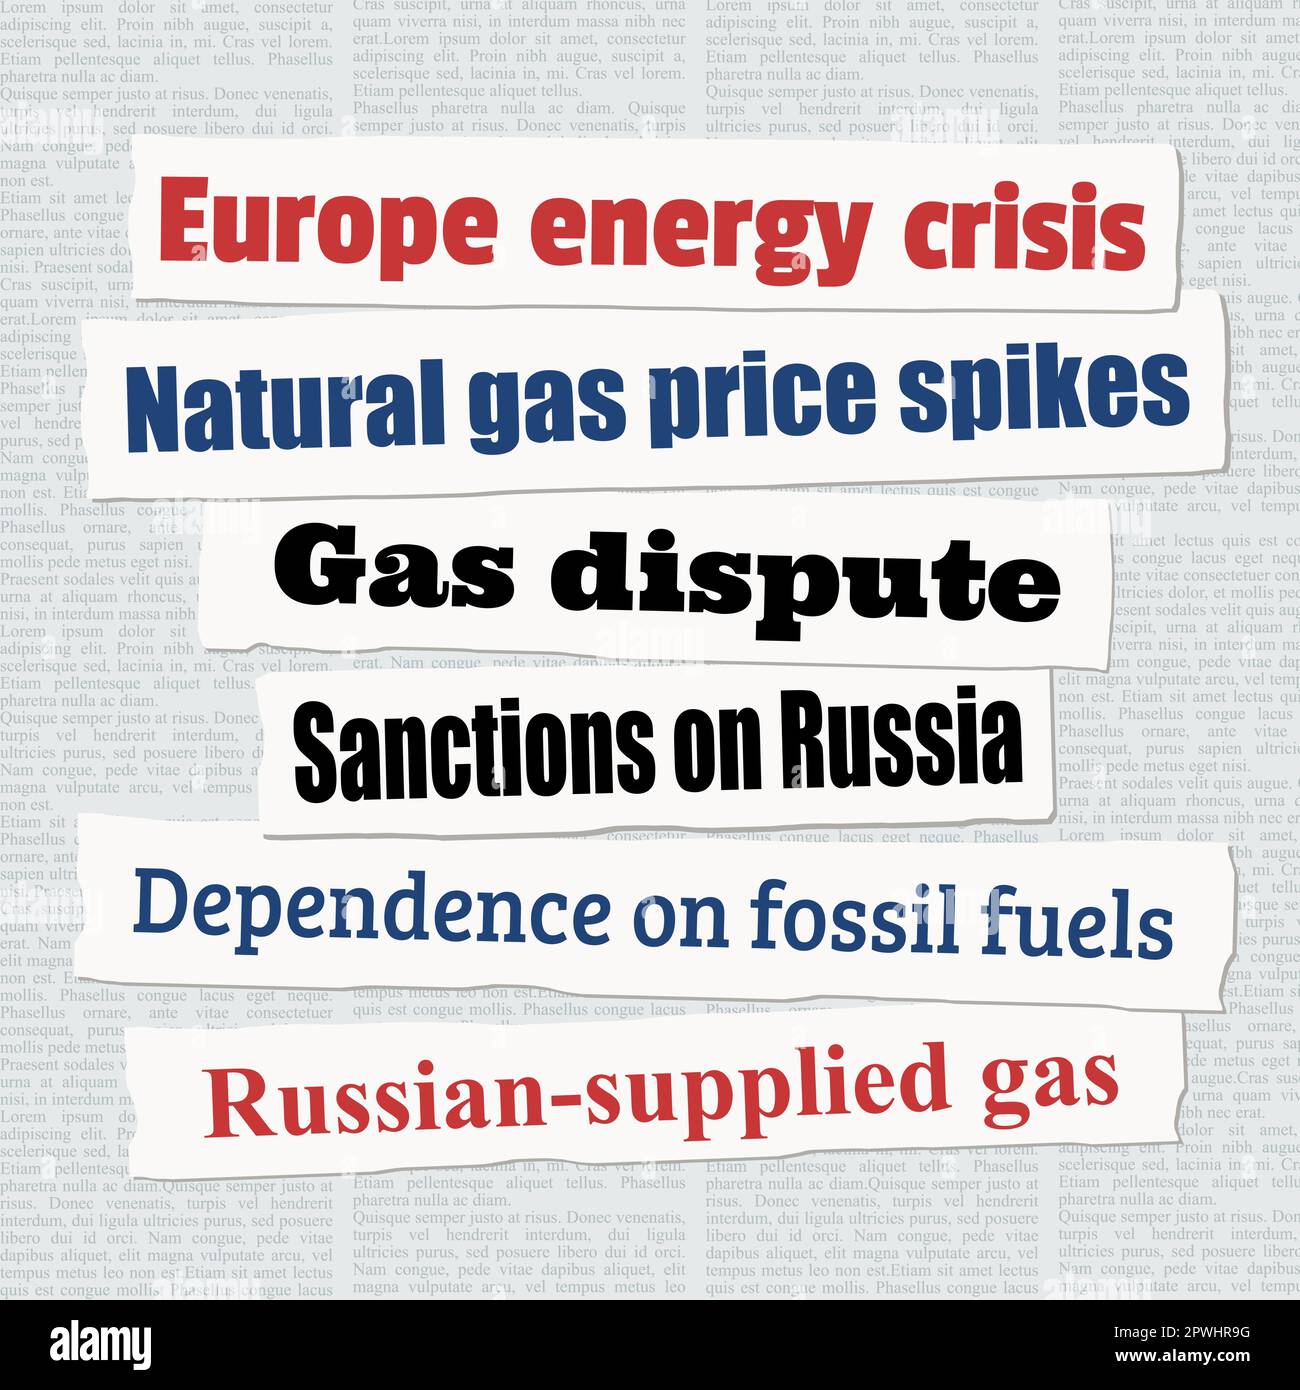 European energy crisis news headlines. Newspaper clippings about natural gas crisis and dependency on fossil fuels. Stock Vector